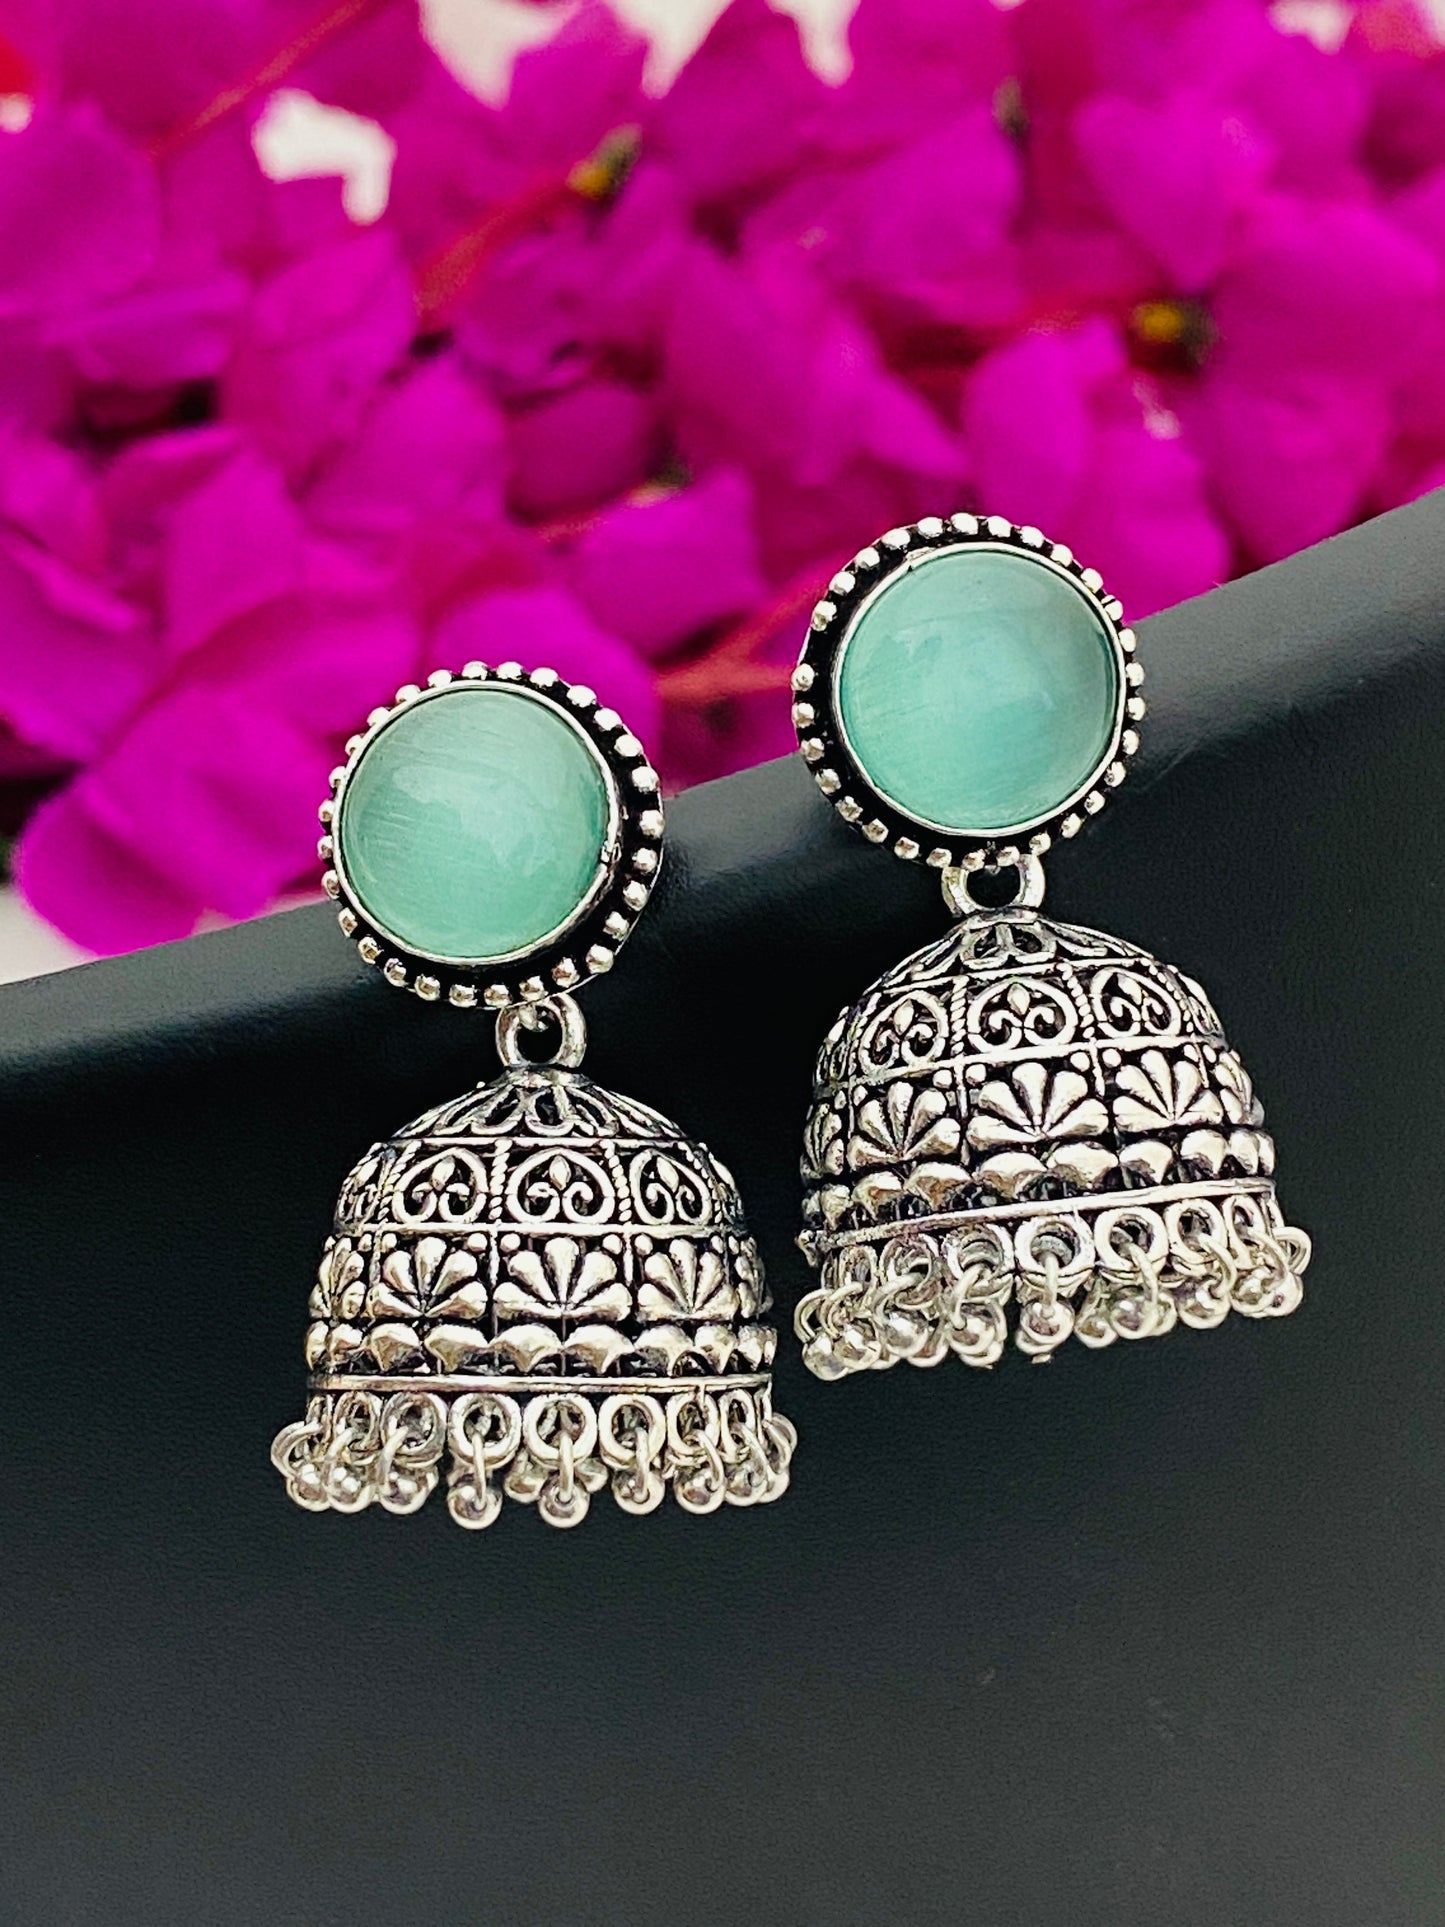 Charming Light Blue Stone Beaded German Silver Plated Oxidized Jhumka Earrings With Dangle Beads